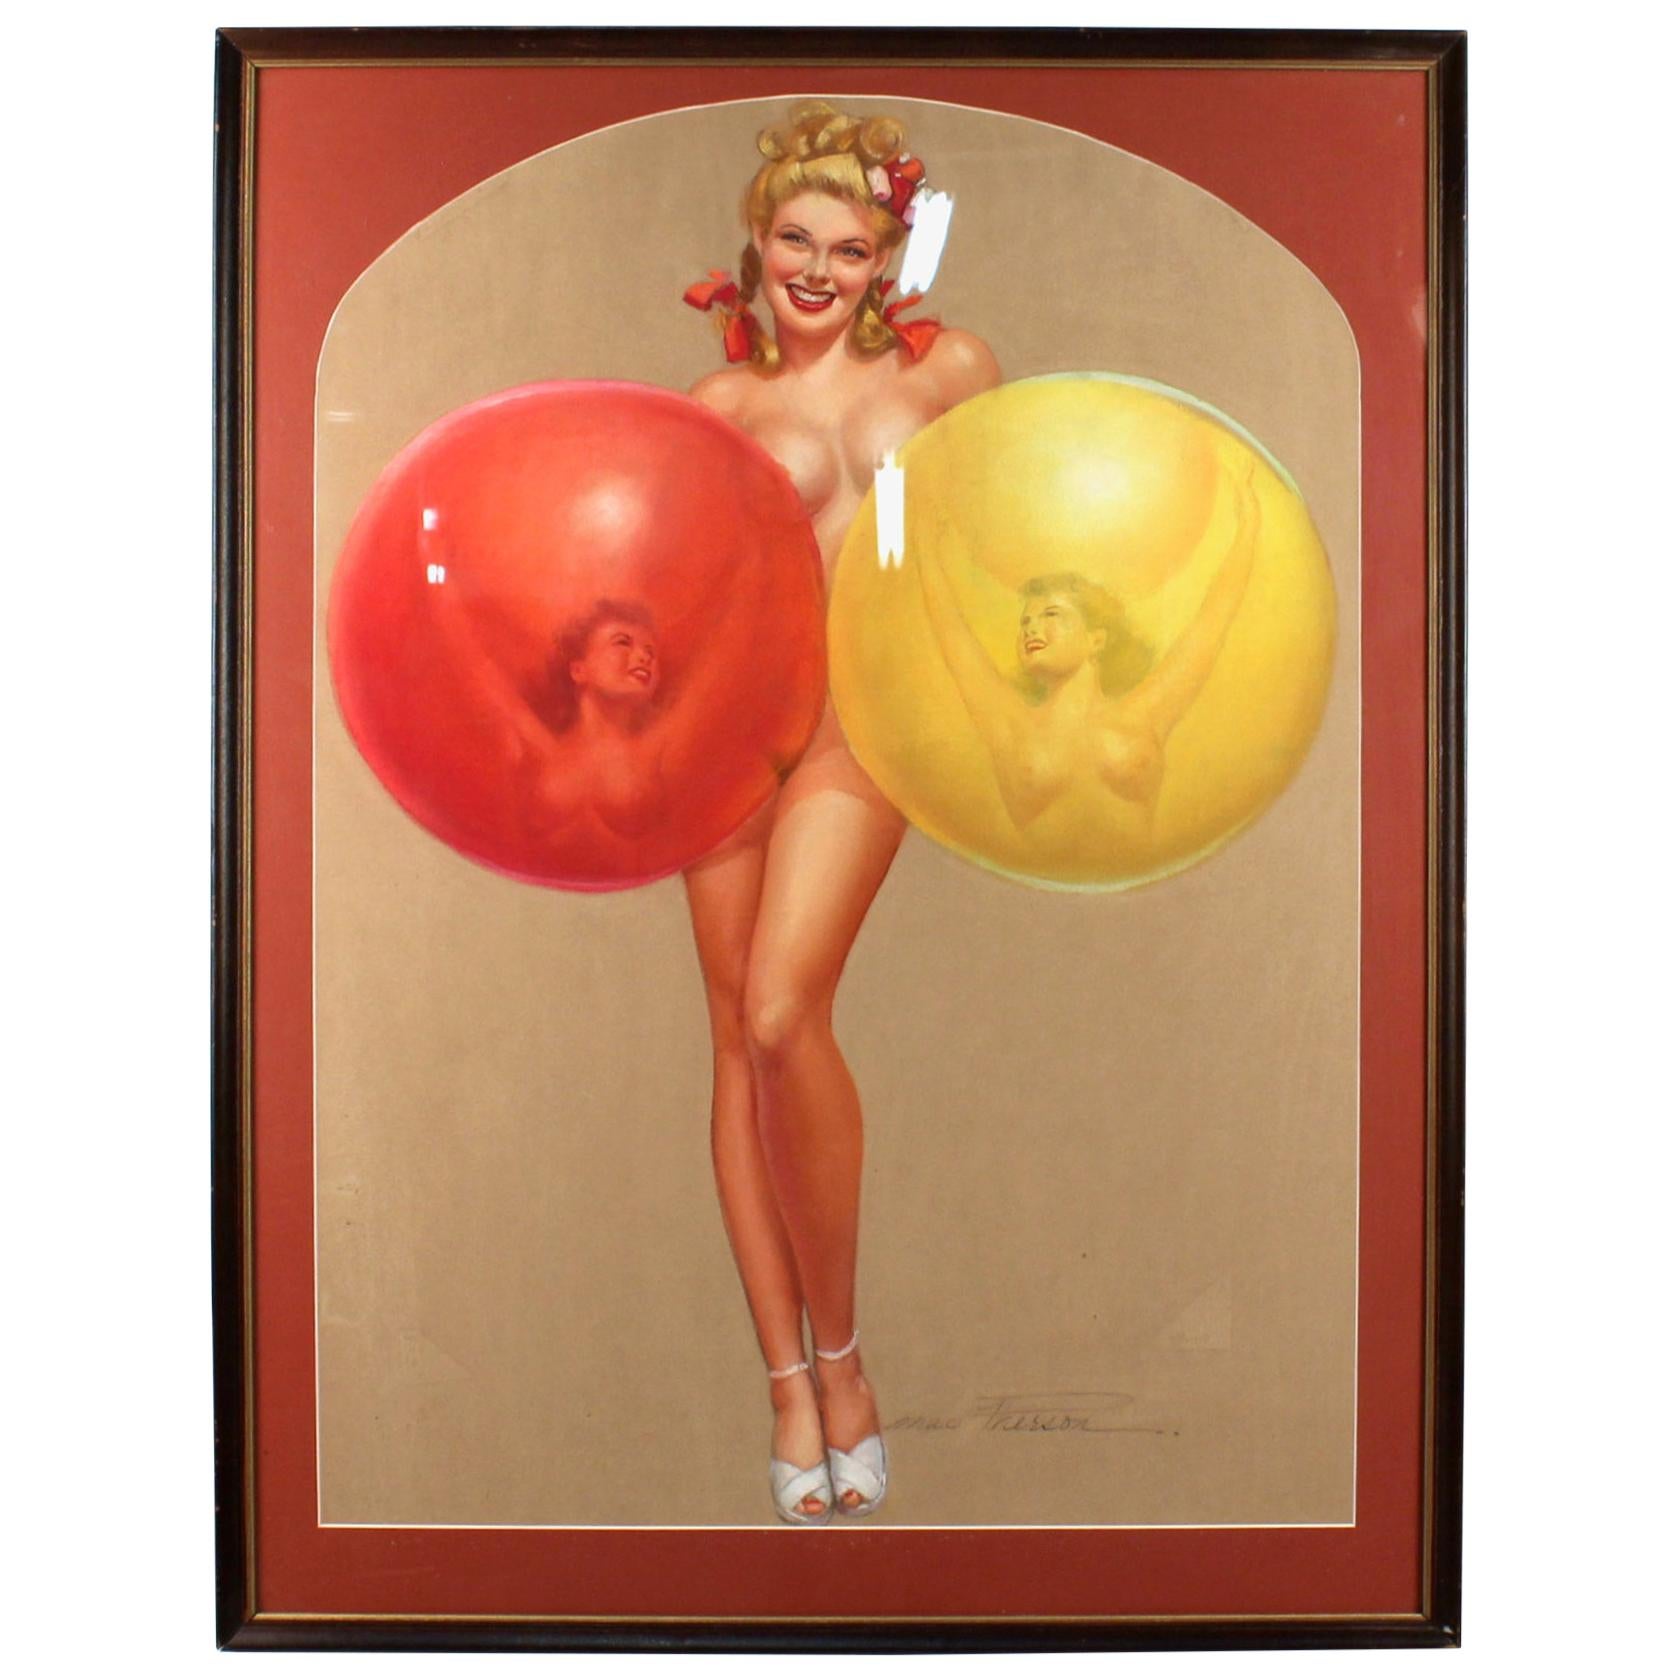 Original Earl MacPherson Pastel Painting of a Pin-Up Girl with Balloons, 1940s